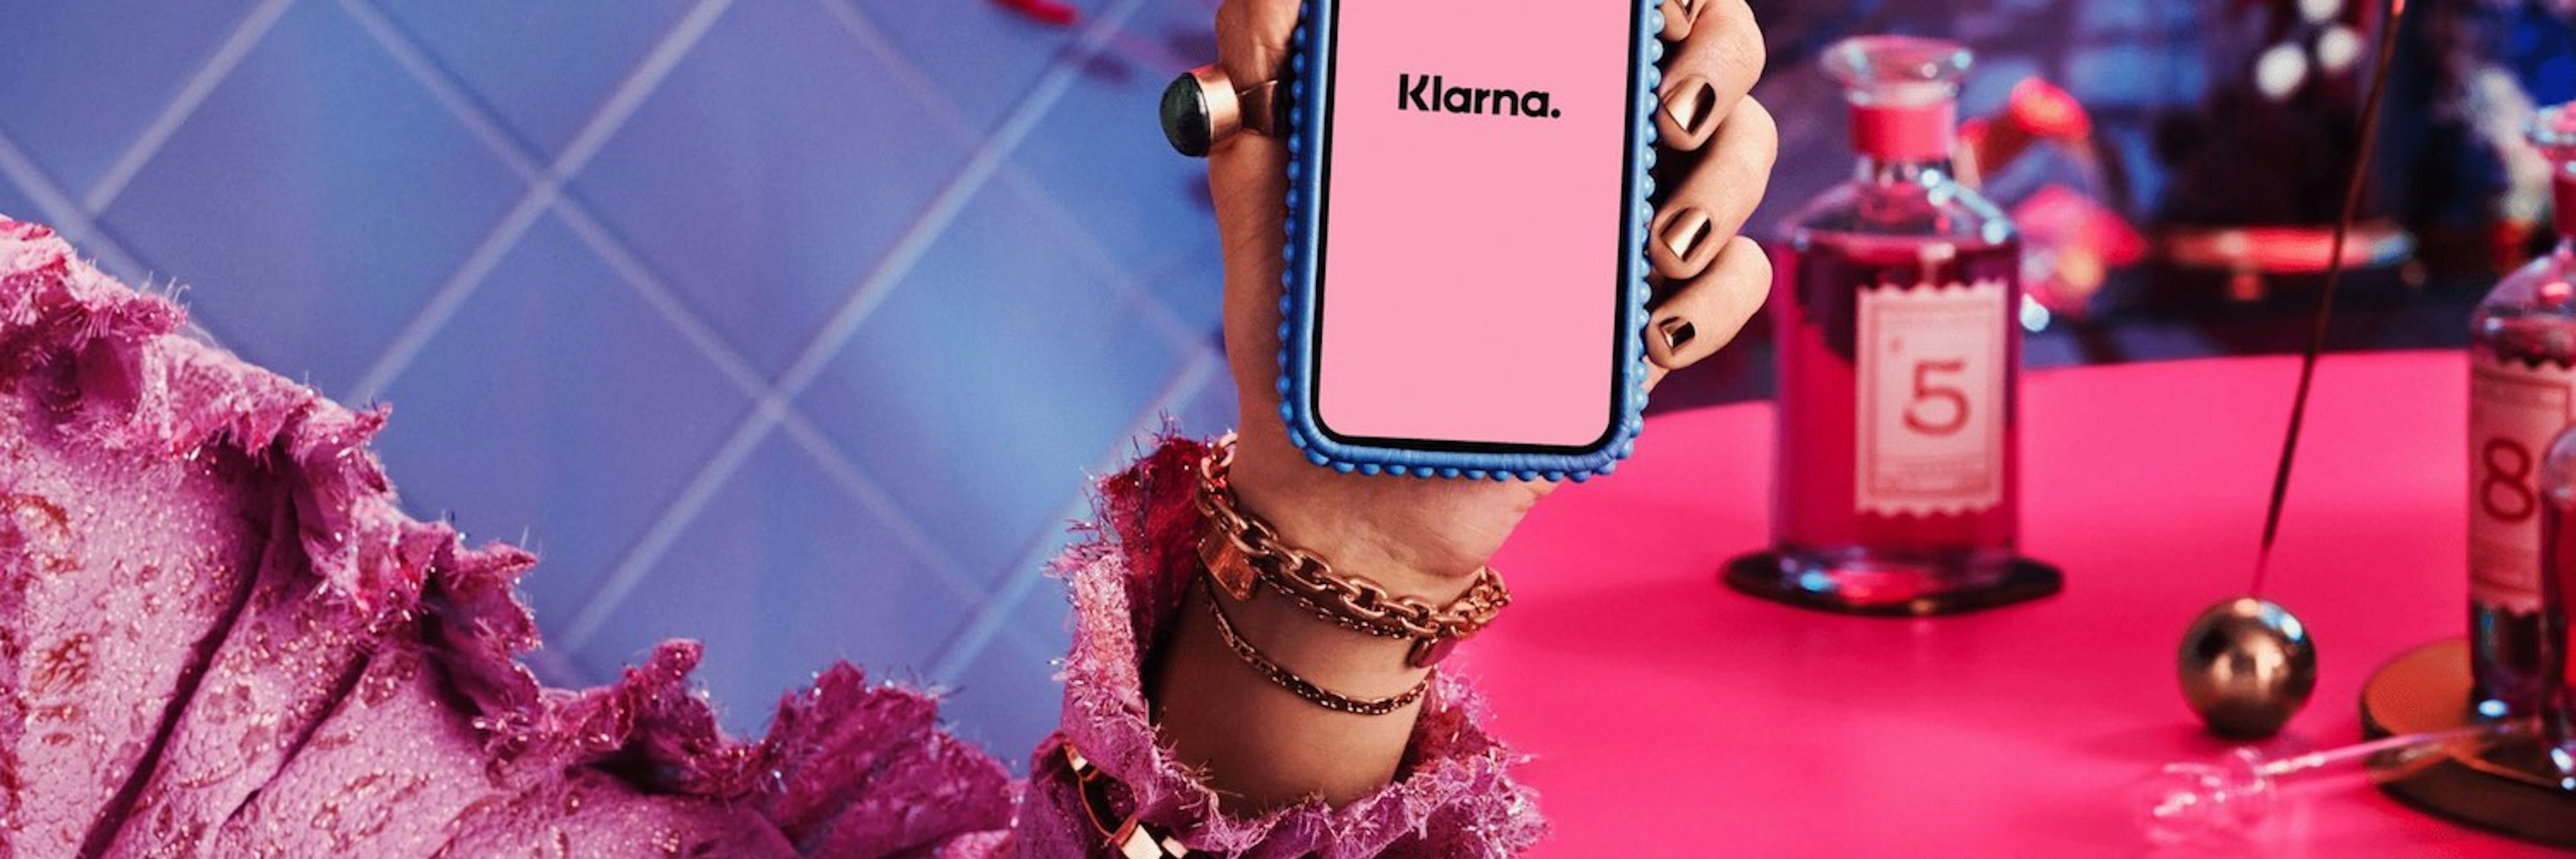 An image of someone holding a smartphone showing the Klarna app logo